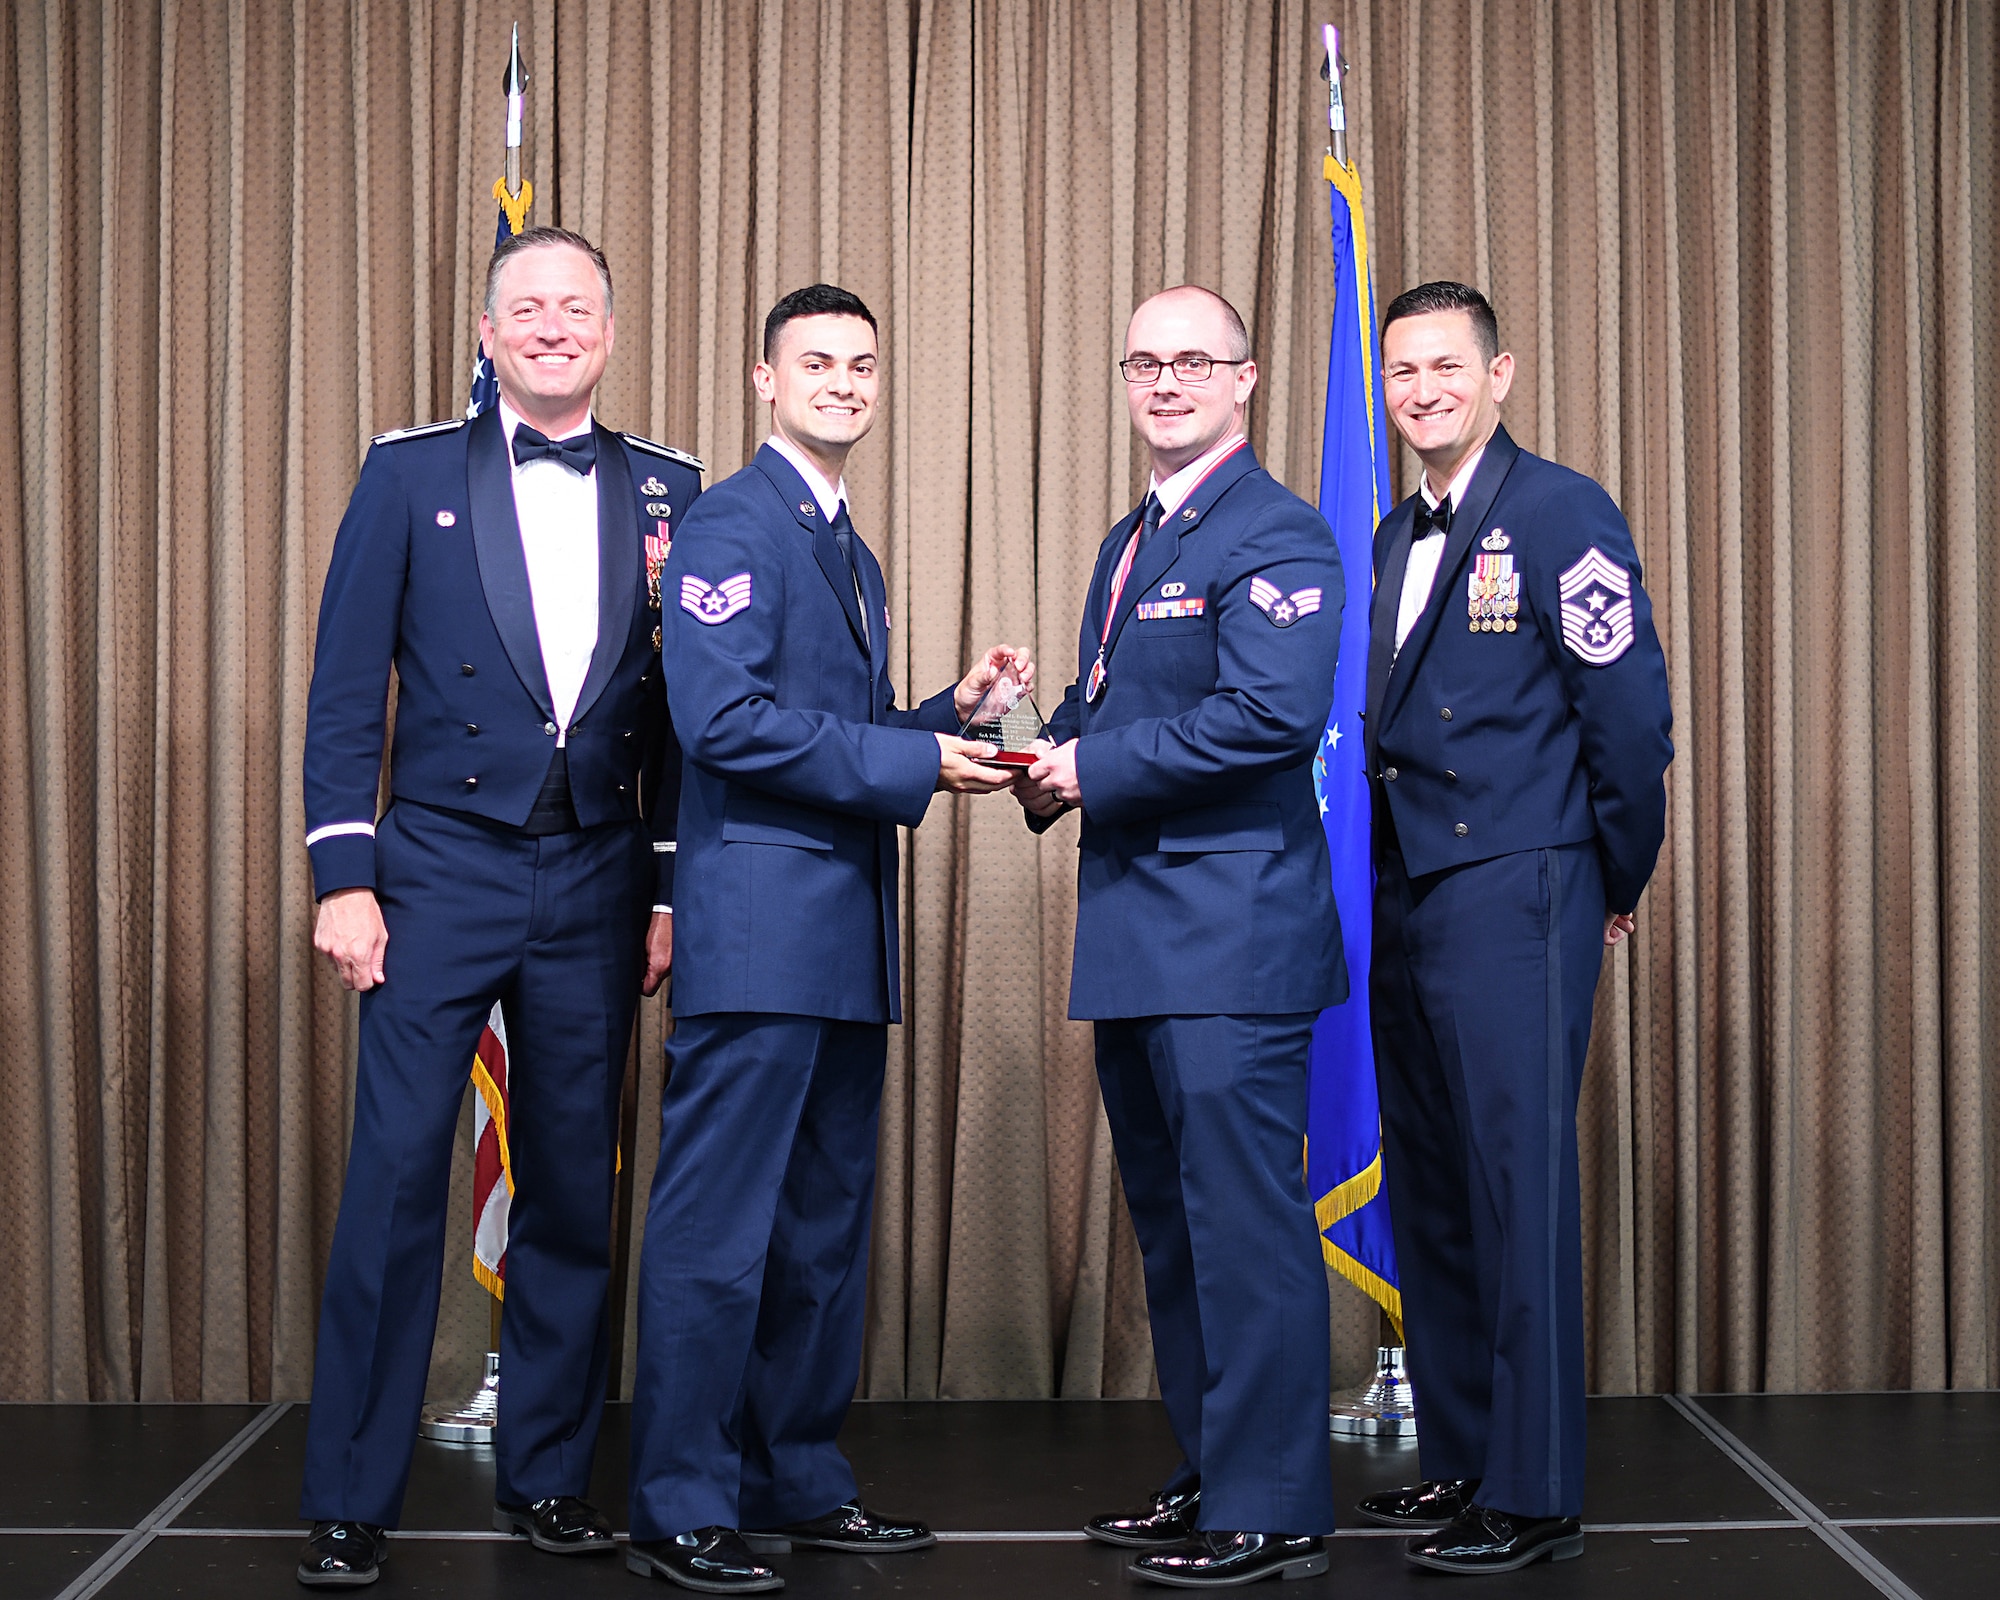 SSgt Matthew Romero, Network 5/6 representative, presents Distinguished Graduate Award to SrA Michael Coleman, Etchberger Airman Leadership School graduate, June 20, 2019, on Grand Forks Air Force Base, North Dakota. ALS graduation is the culmination of the first level of the Enlisted Professional Military Education continuum directed toward preparing upcoming noncommissioned officers with leadership skills for their careers. (U.S. Air Force photo by Senior Airman Elijaih Tiggs)